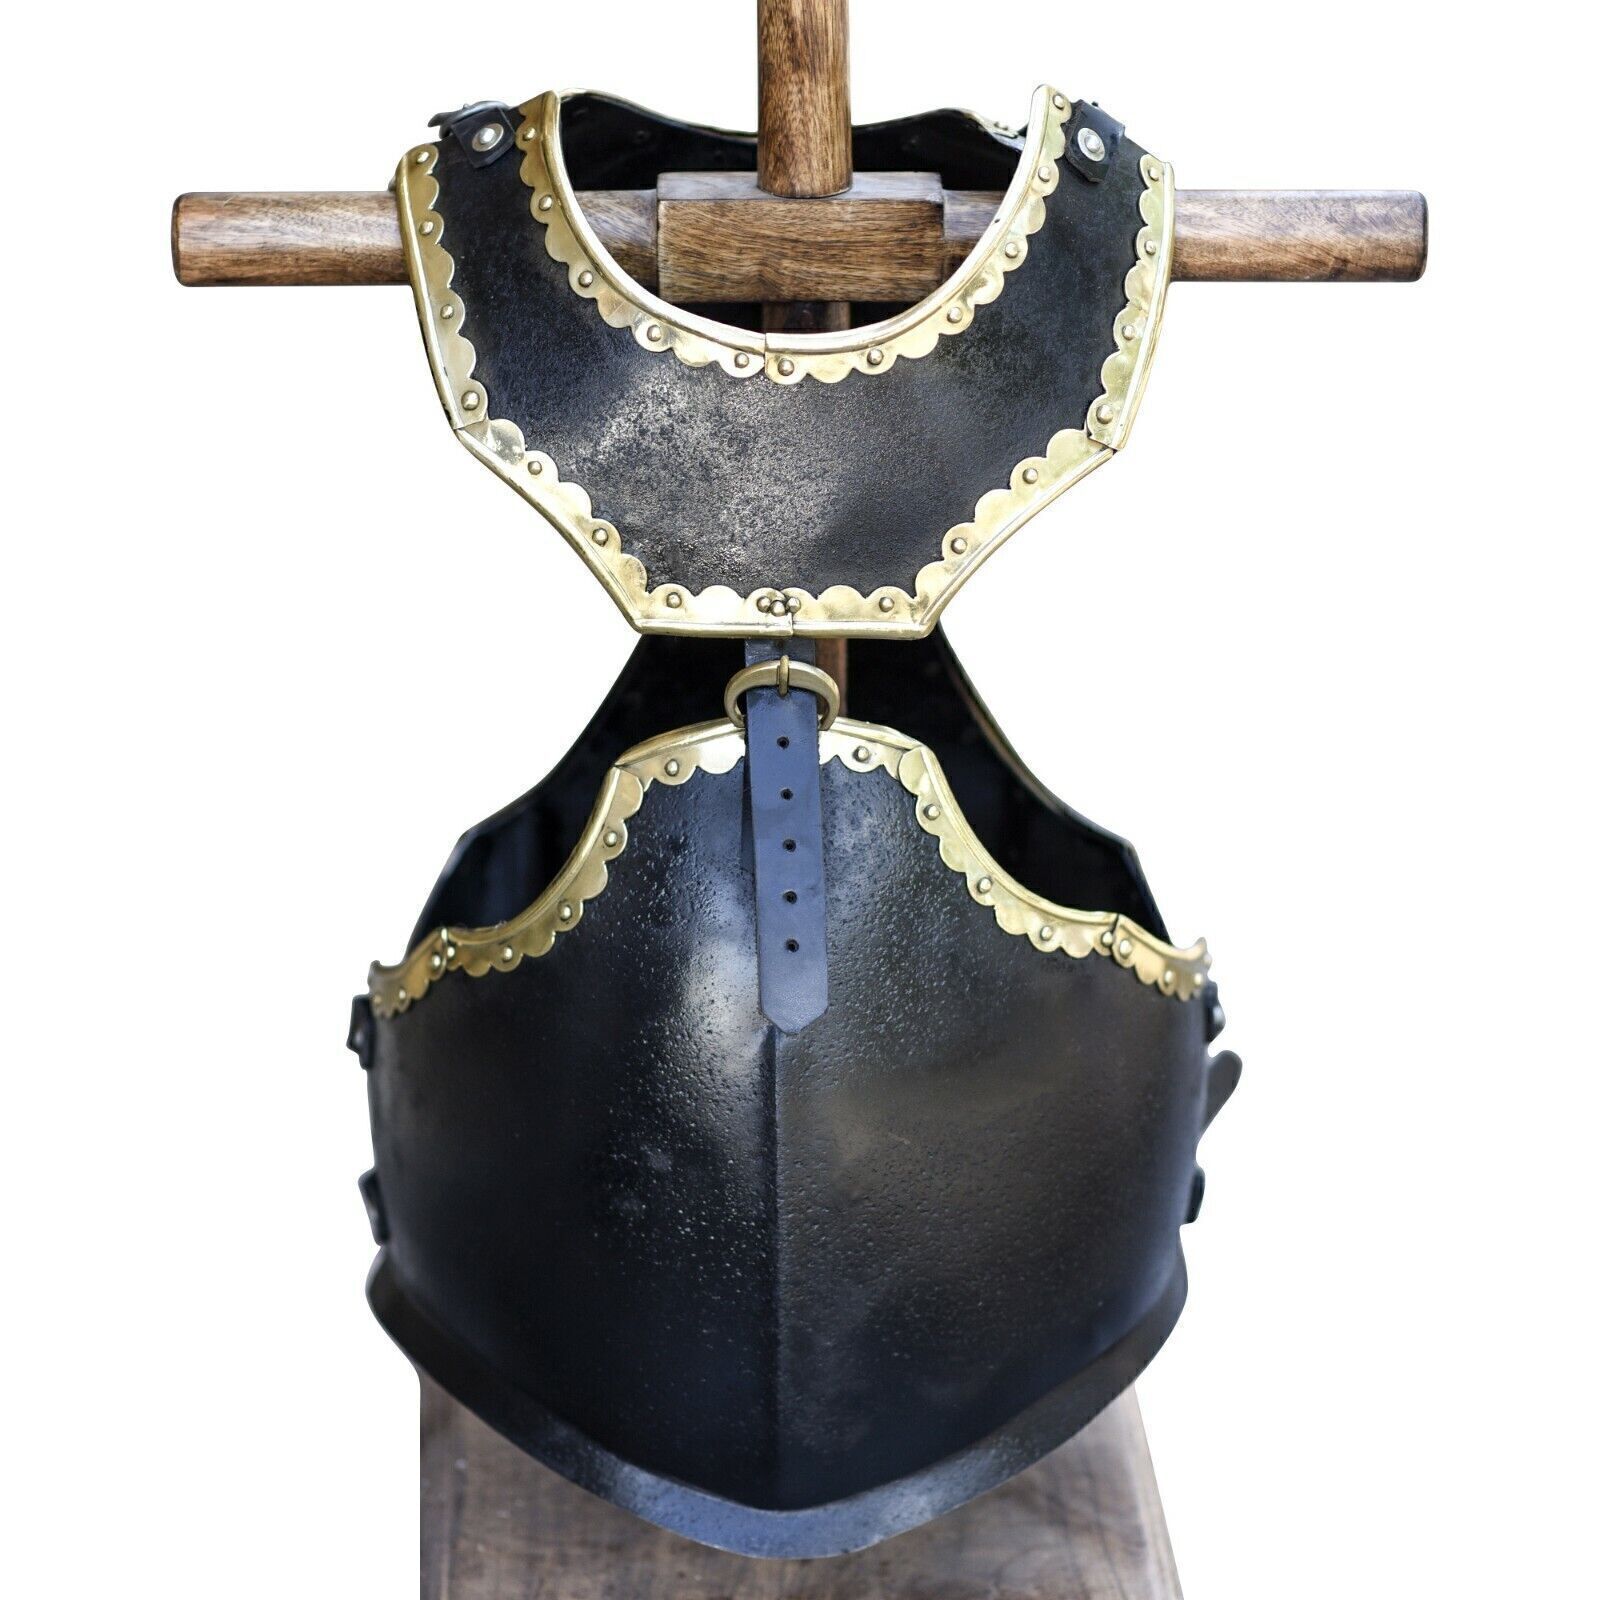 The Cursed Black Knight Functional Steel Practice Medieval Cuirass Gorget Set